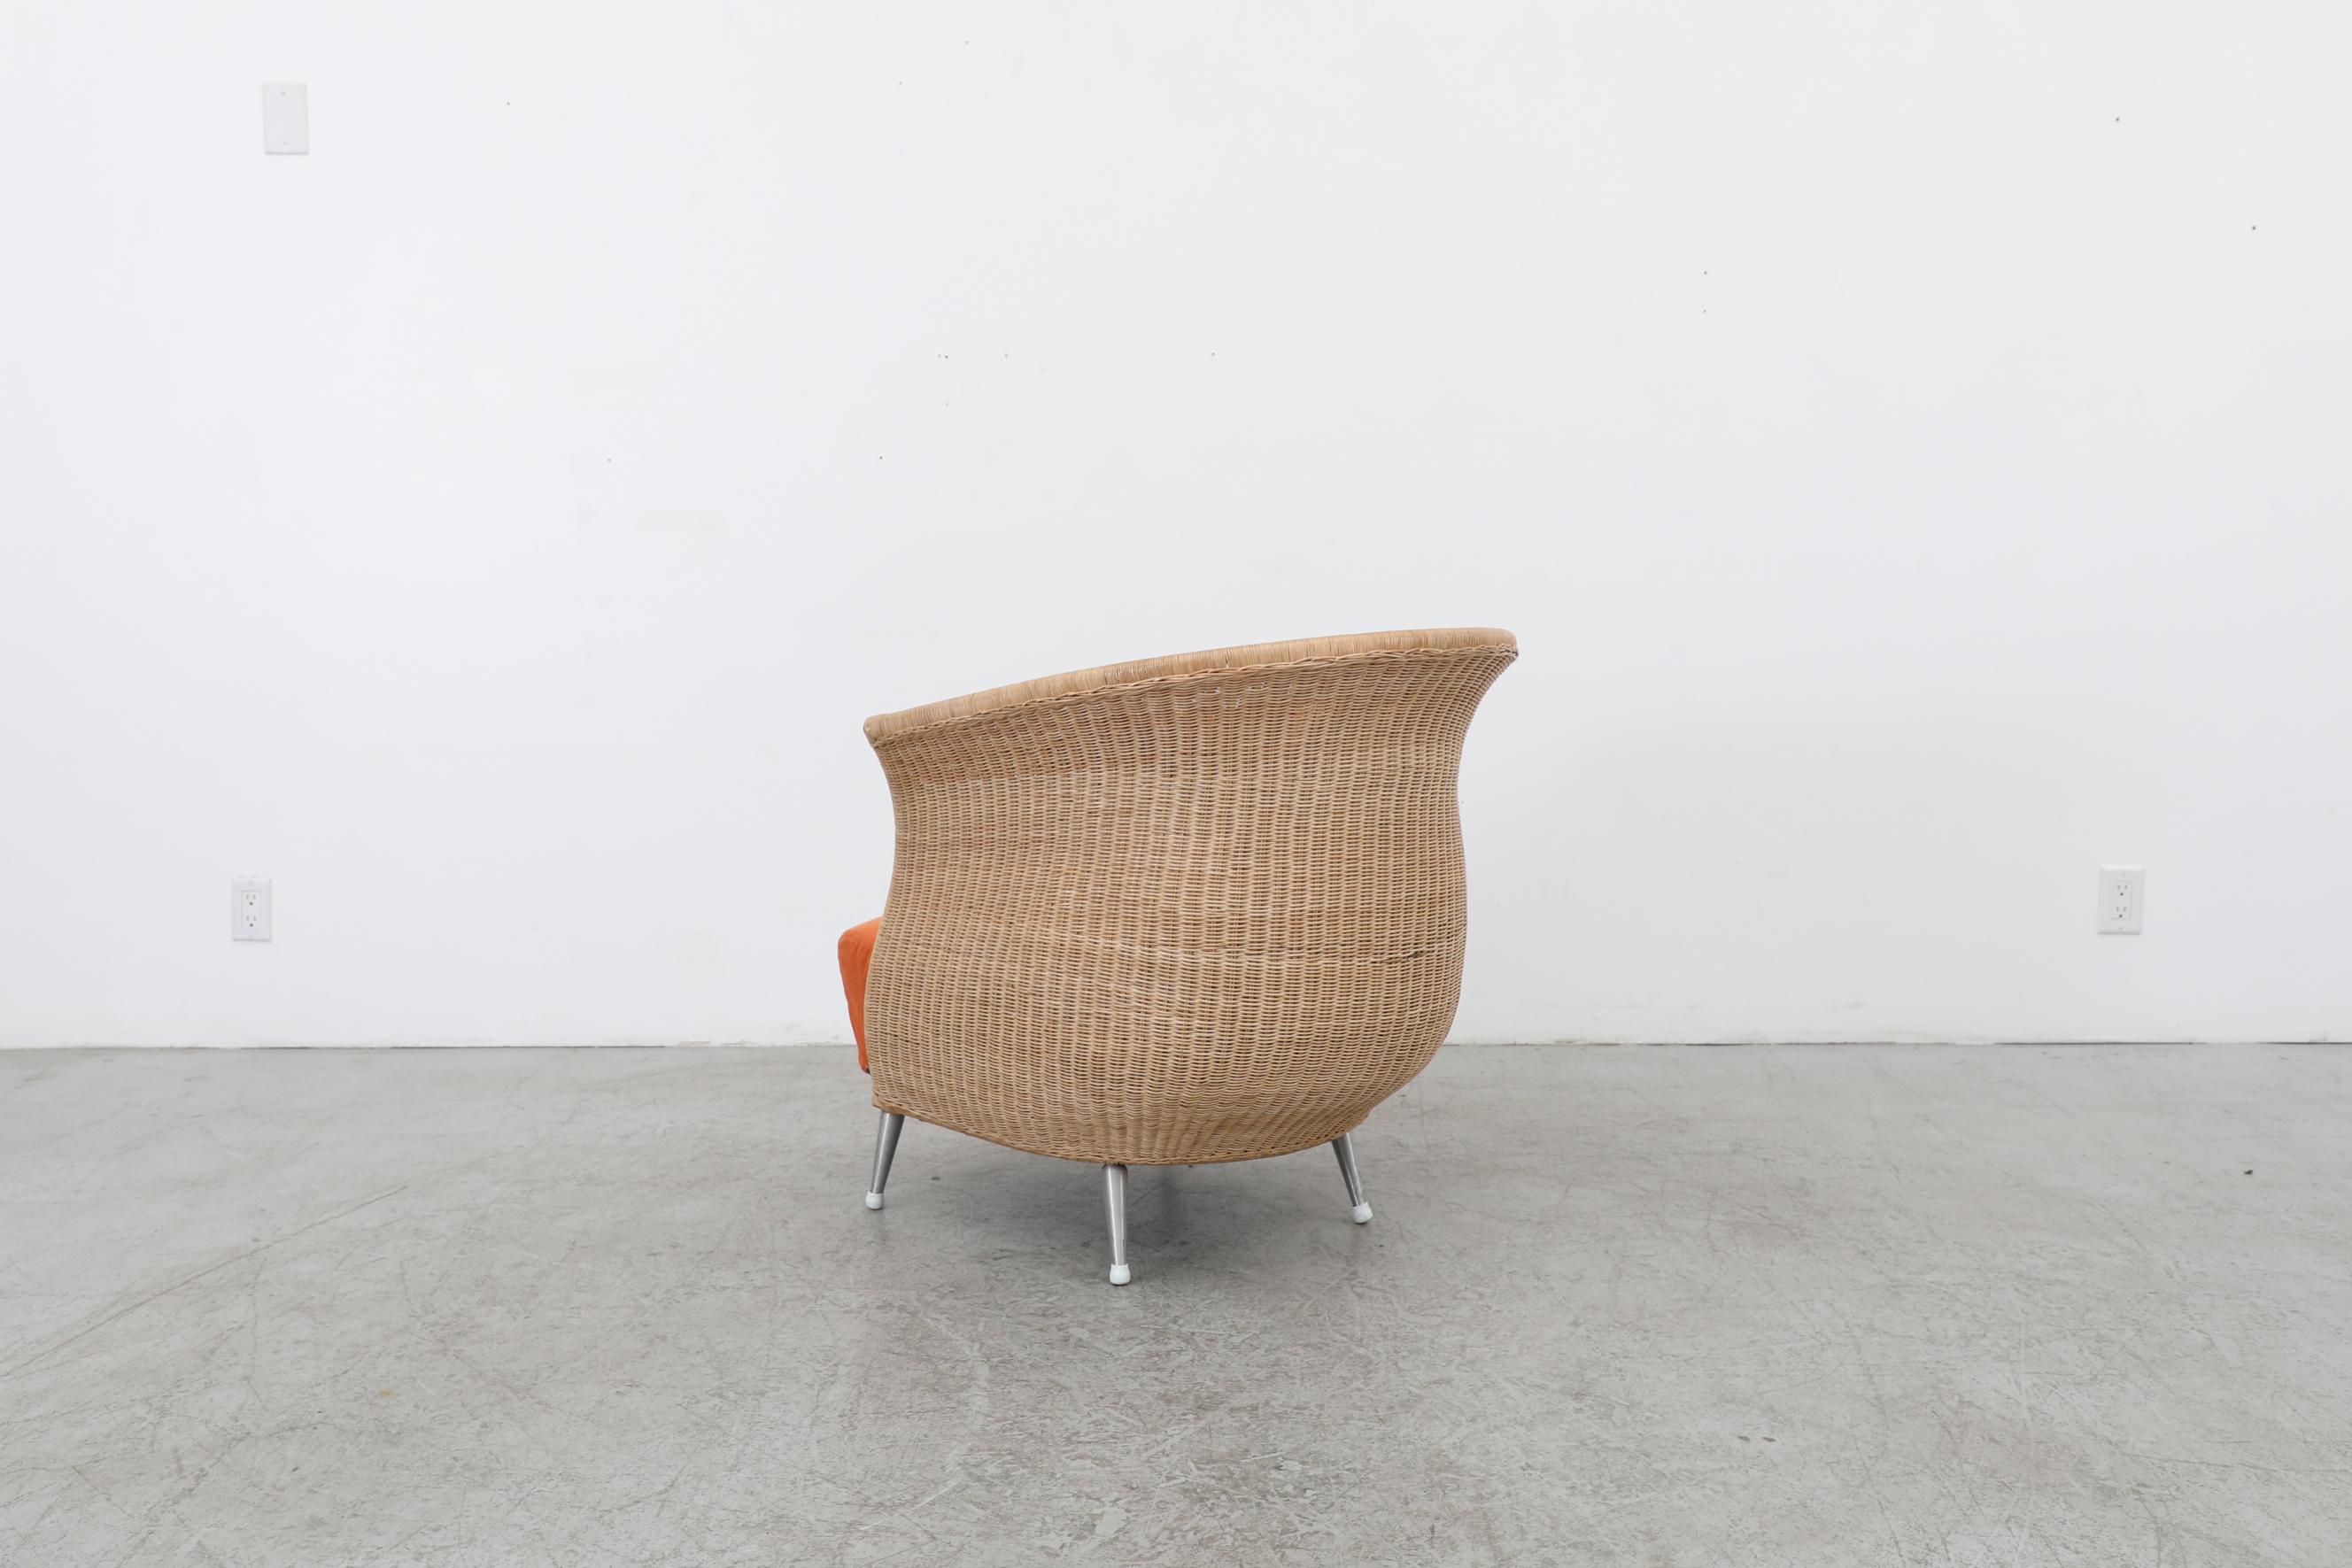 Ligne Roset Organic Shaped Rattan Lounge Chair w/ Orange Cushions & Metal Feet In Good Condition For Sale In Los Angeles, CA